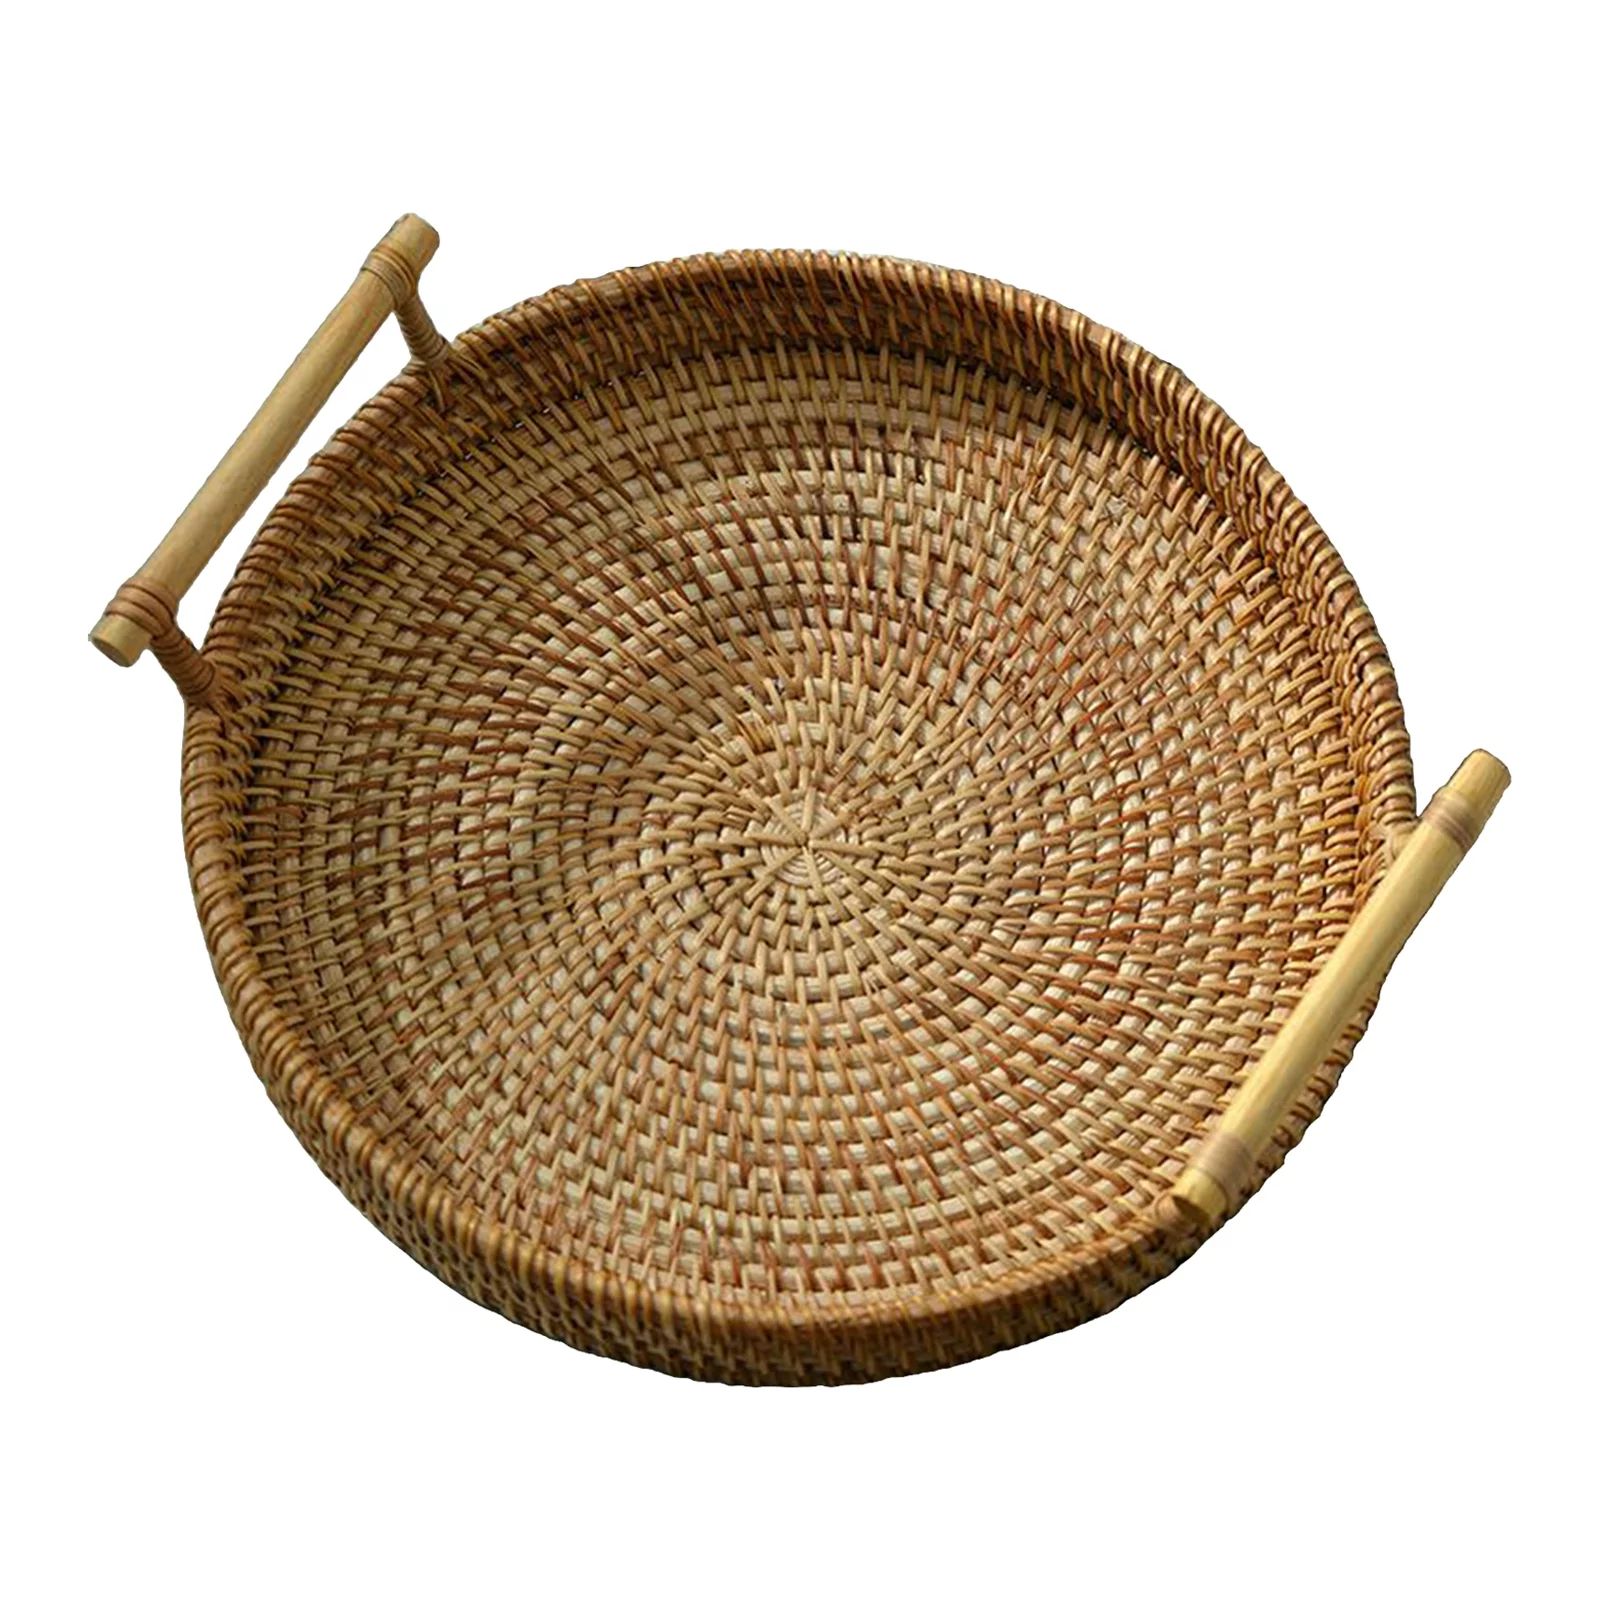 Rattan Hand-Woven Basket Serving Tray with Handles Coffee Table Home Decor 22x3cm | Walmart (US)